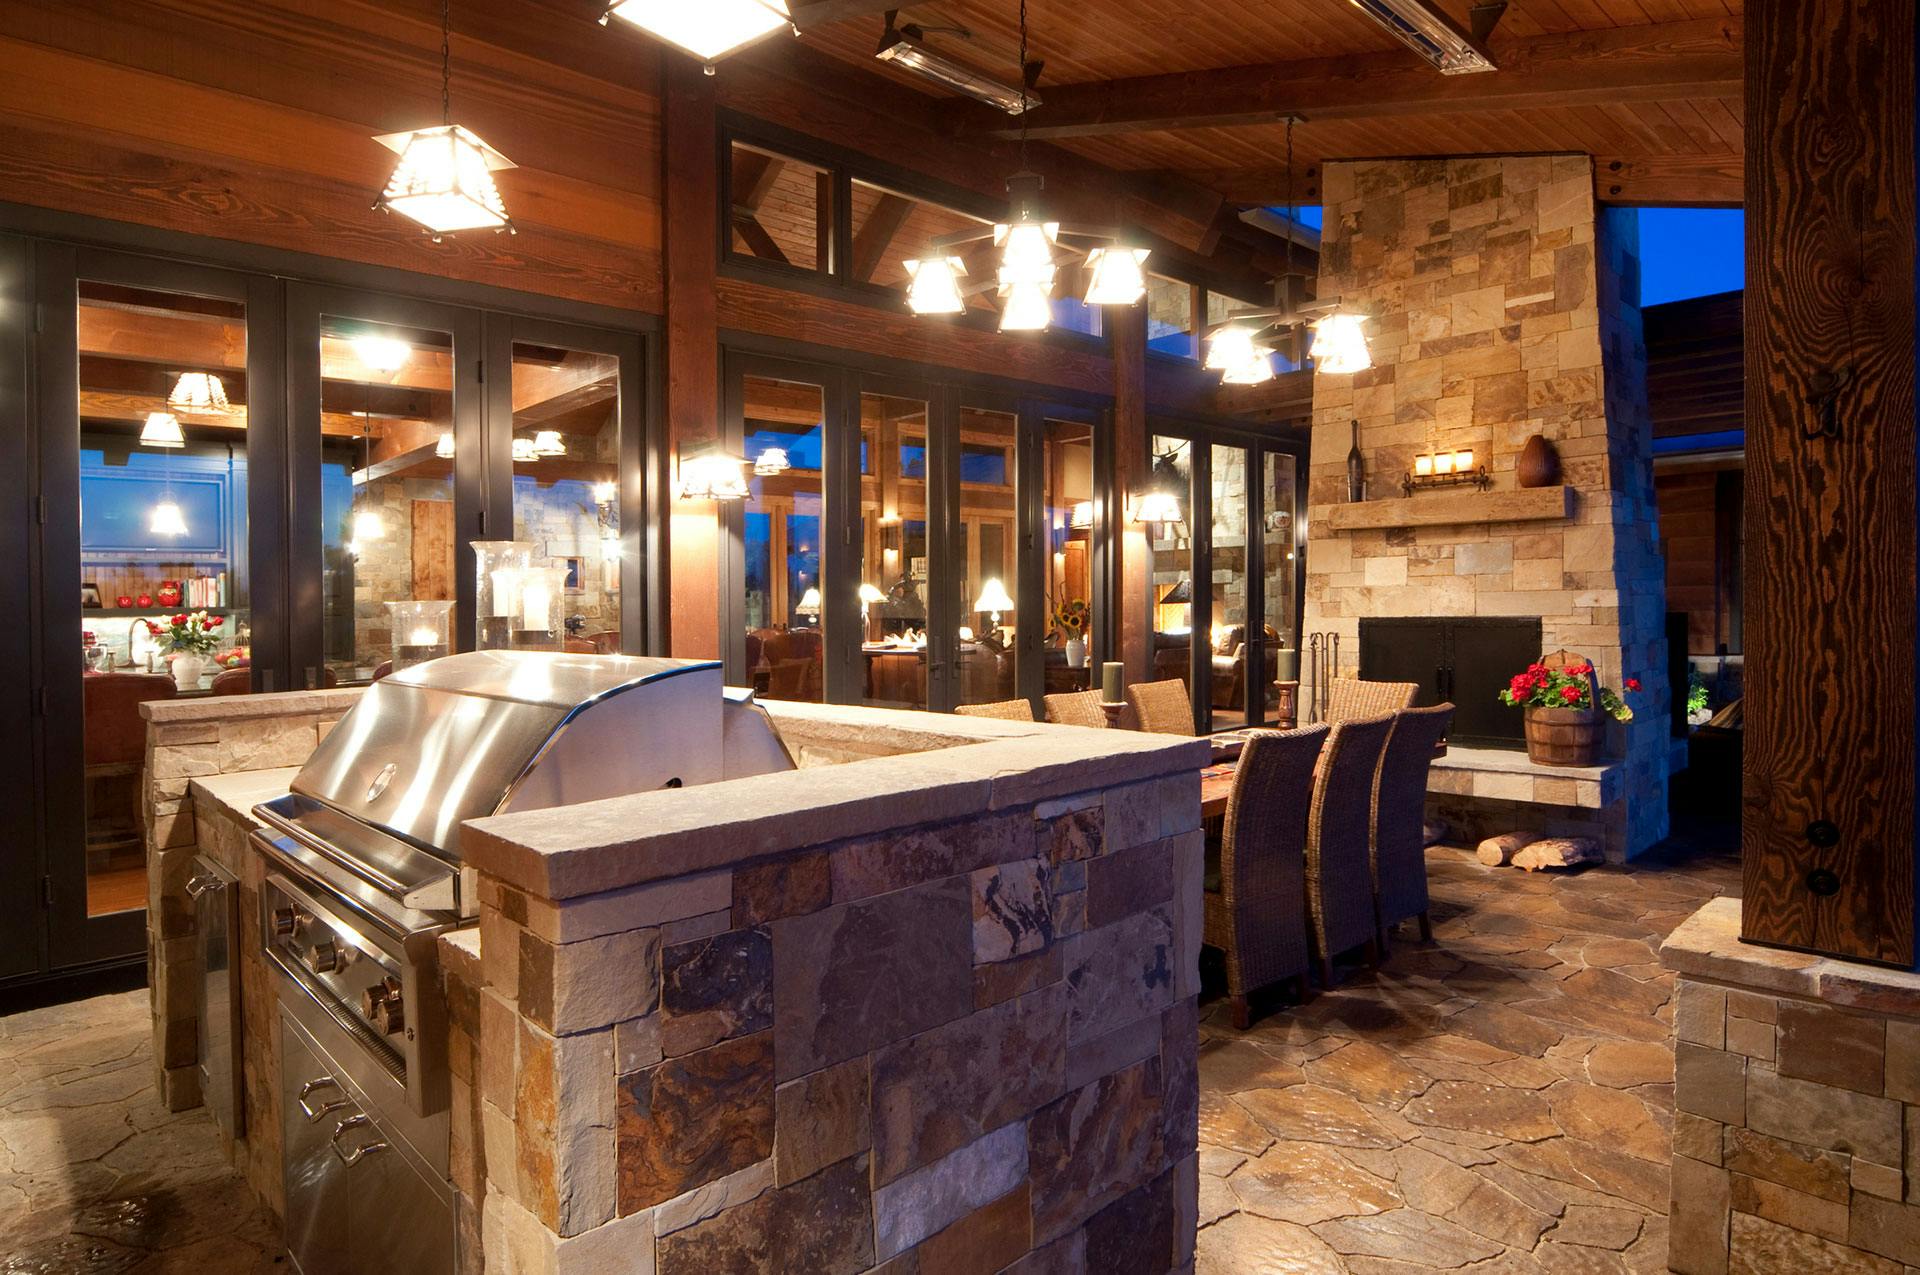 A patio with a grill, lights, and fireplace